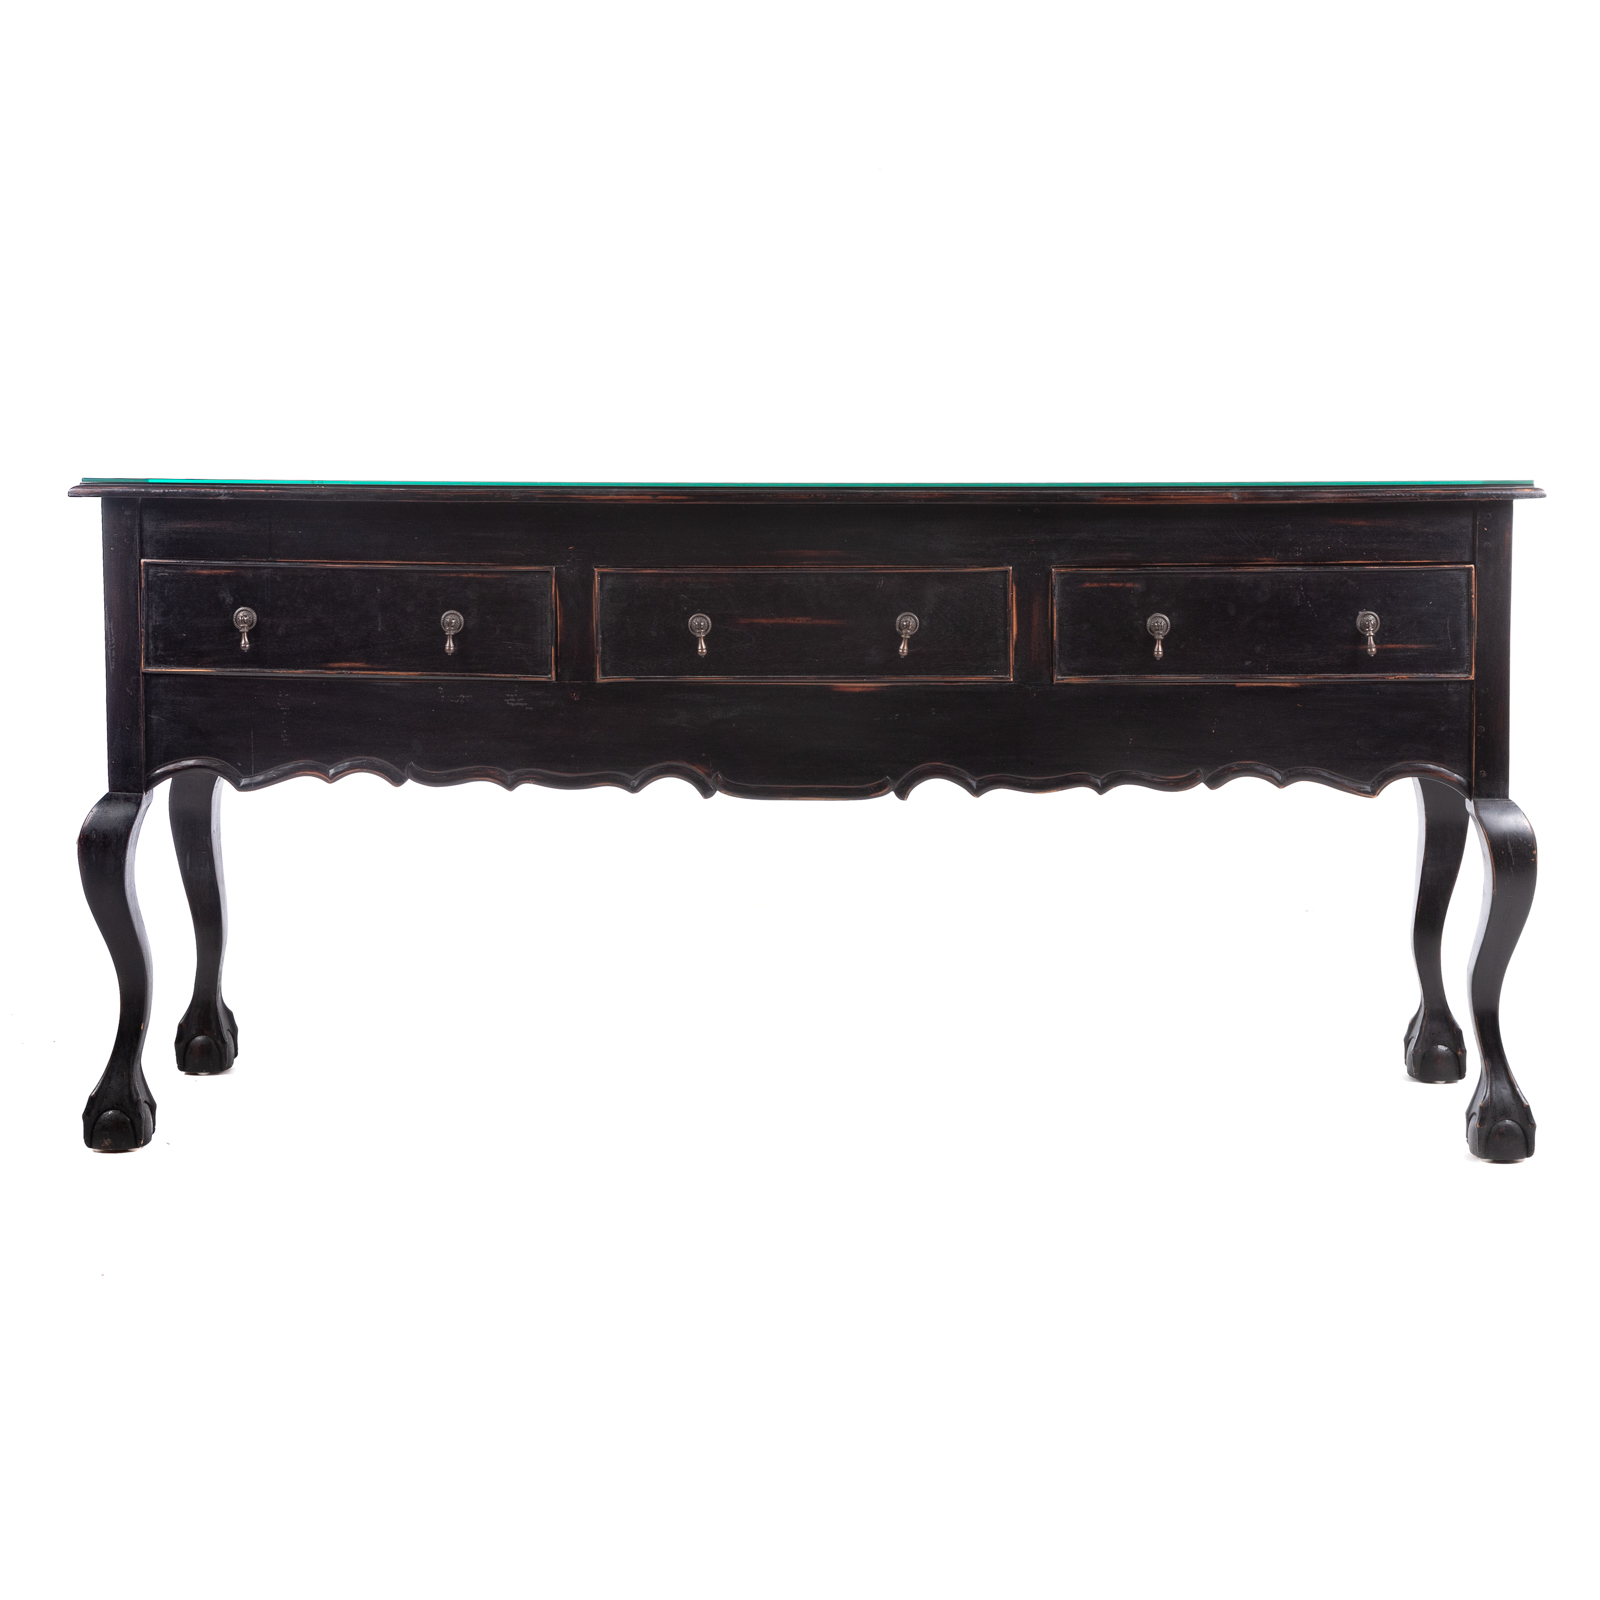 CHIPPENDALE STYLE EBONIZED MIRRORED